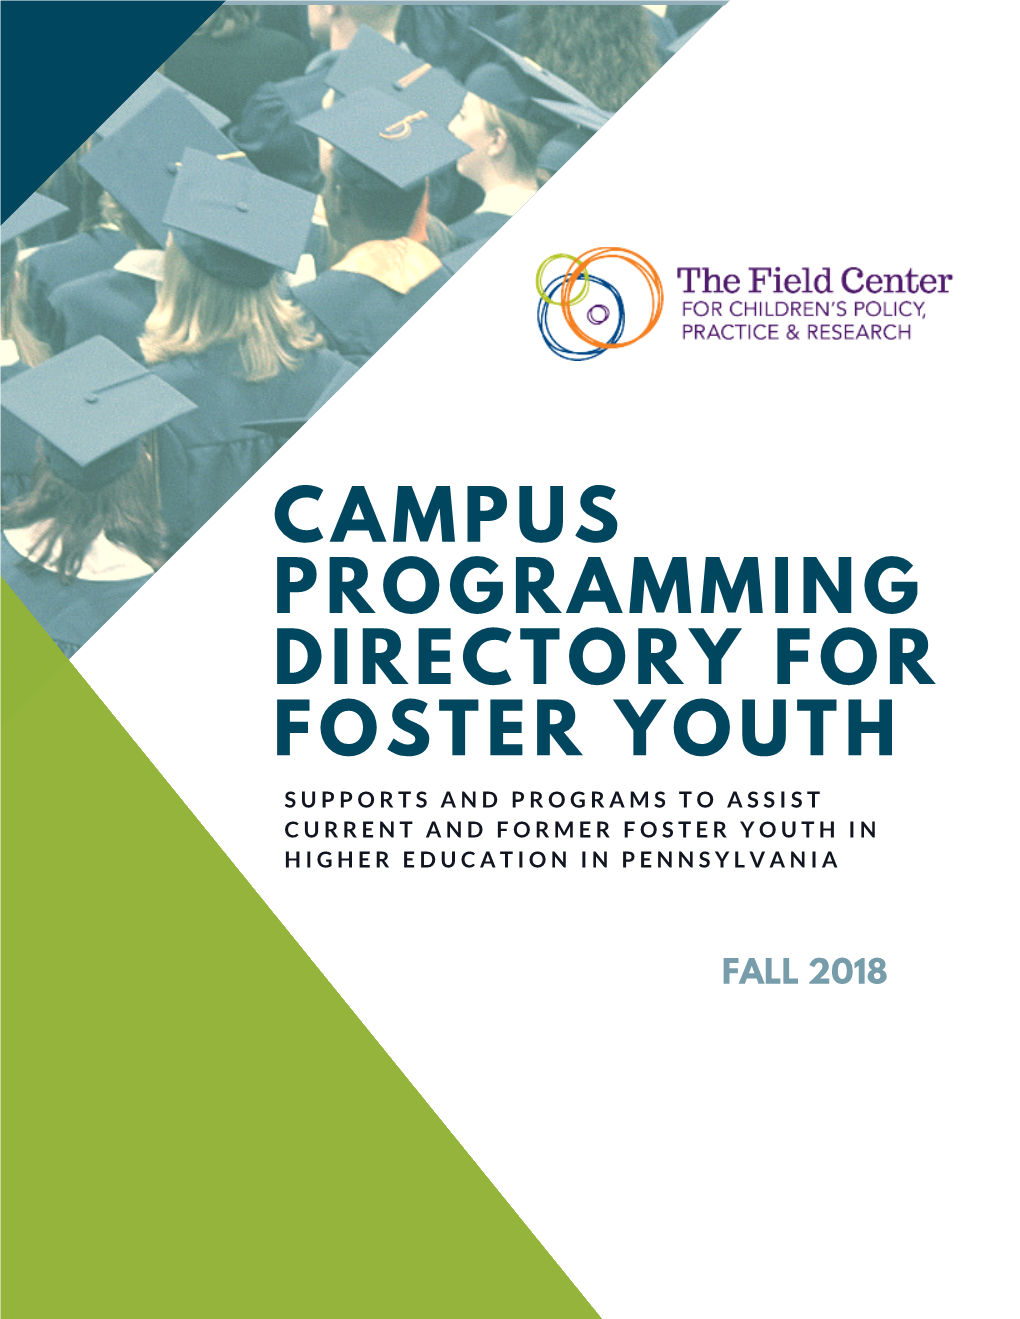 Campus Programming Directory for Foster Youth Supports and Programs to Assist Current and Former Foster Youth in Higher Education in Pennsylvania